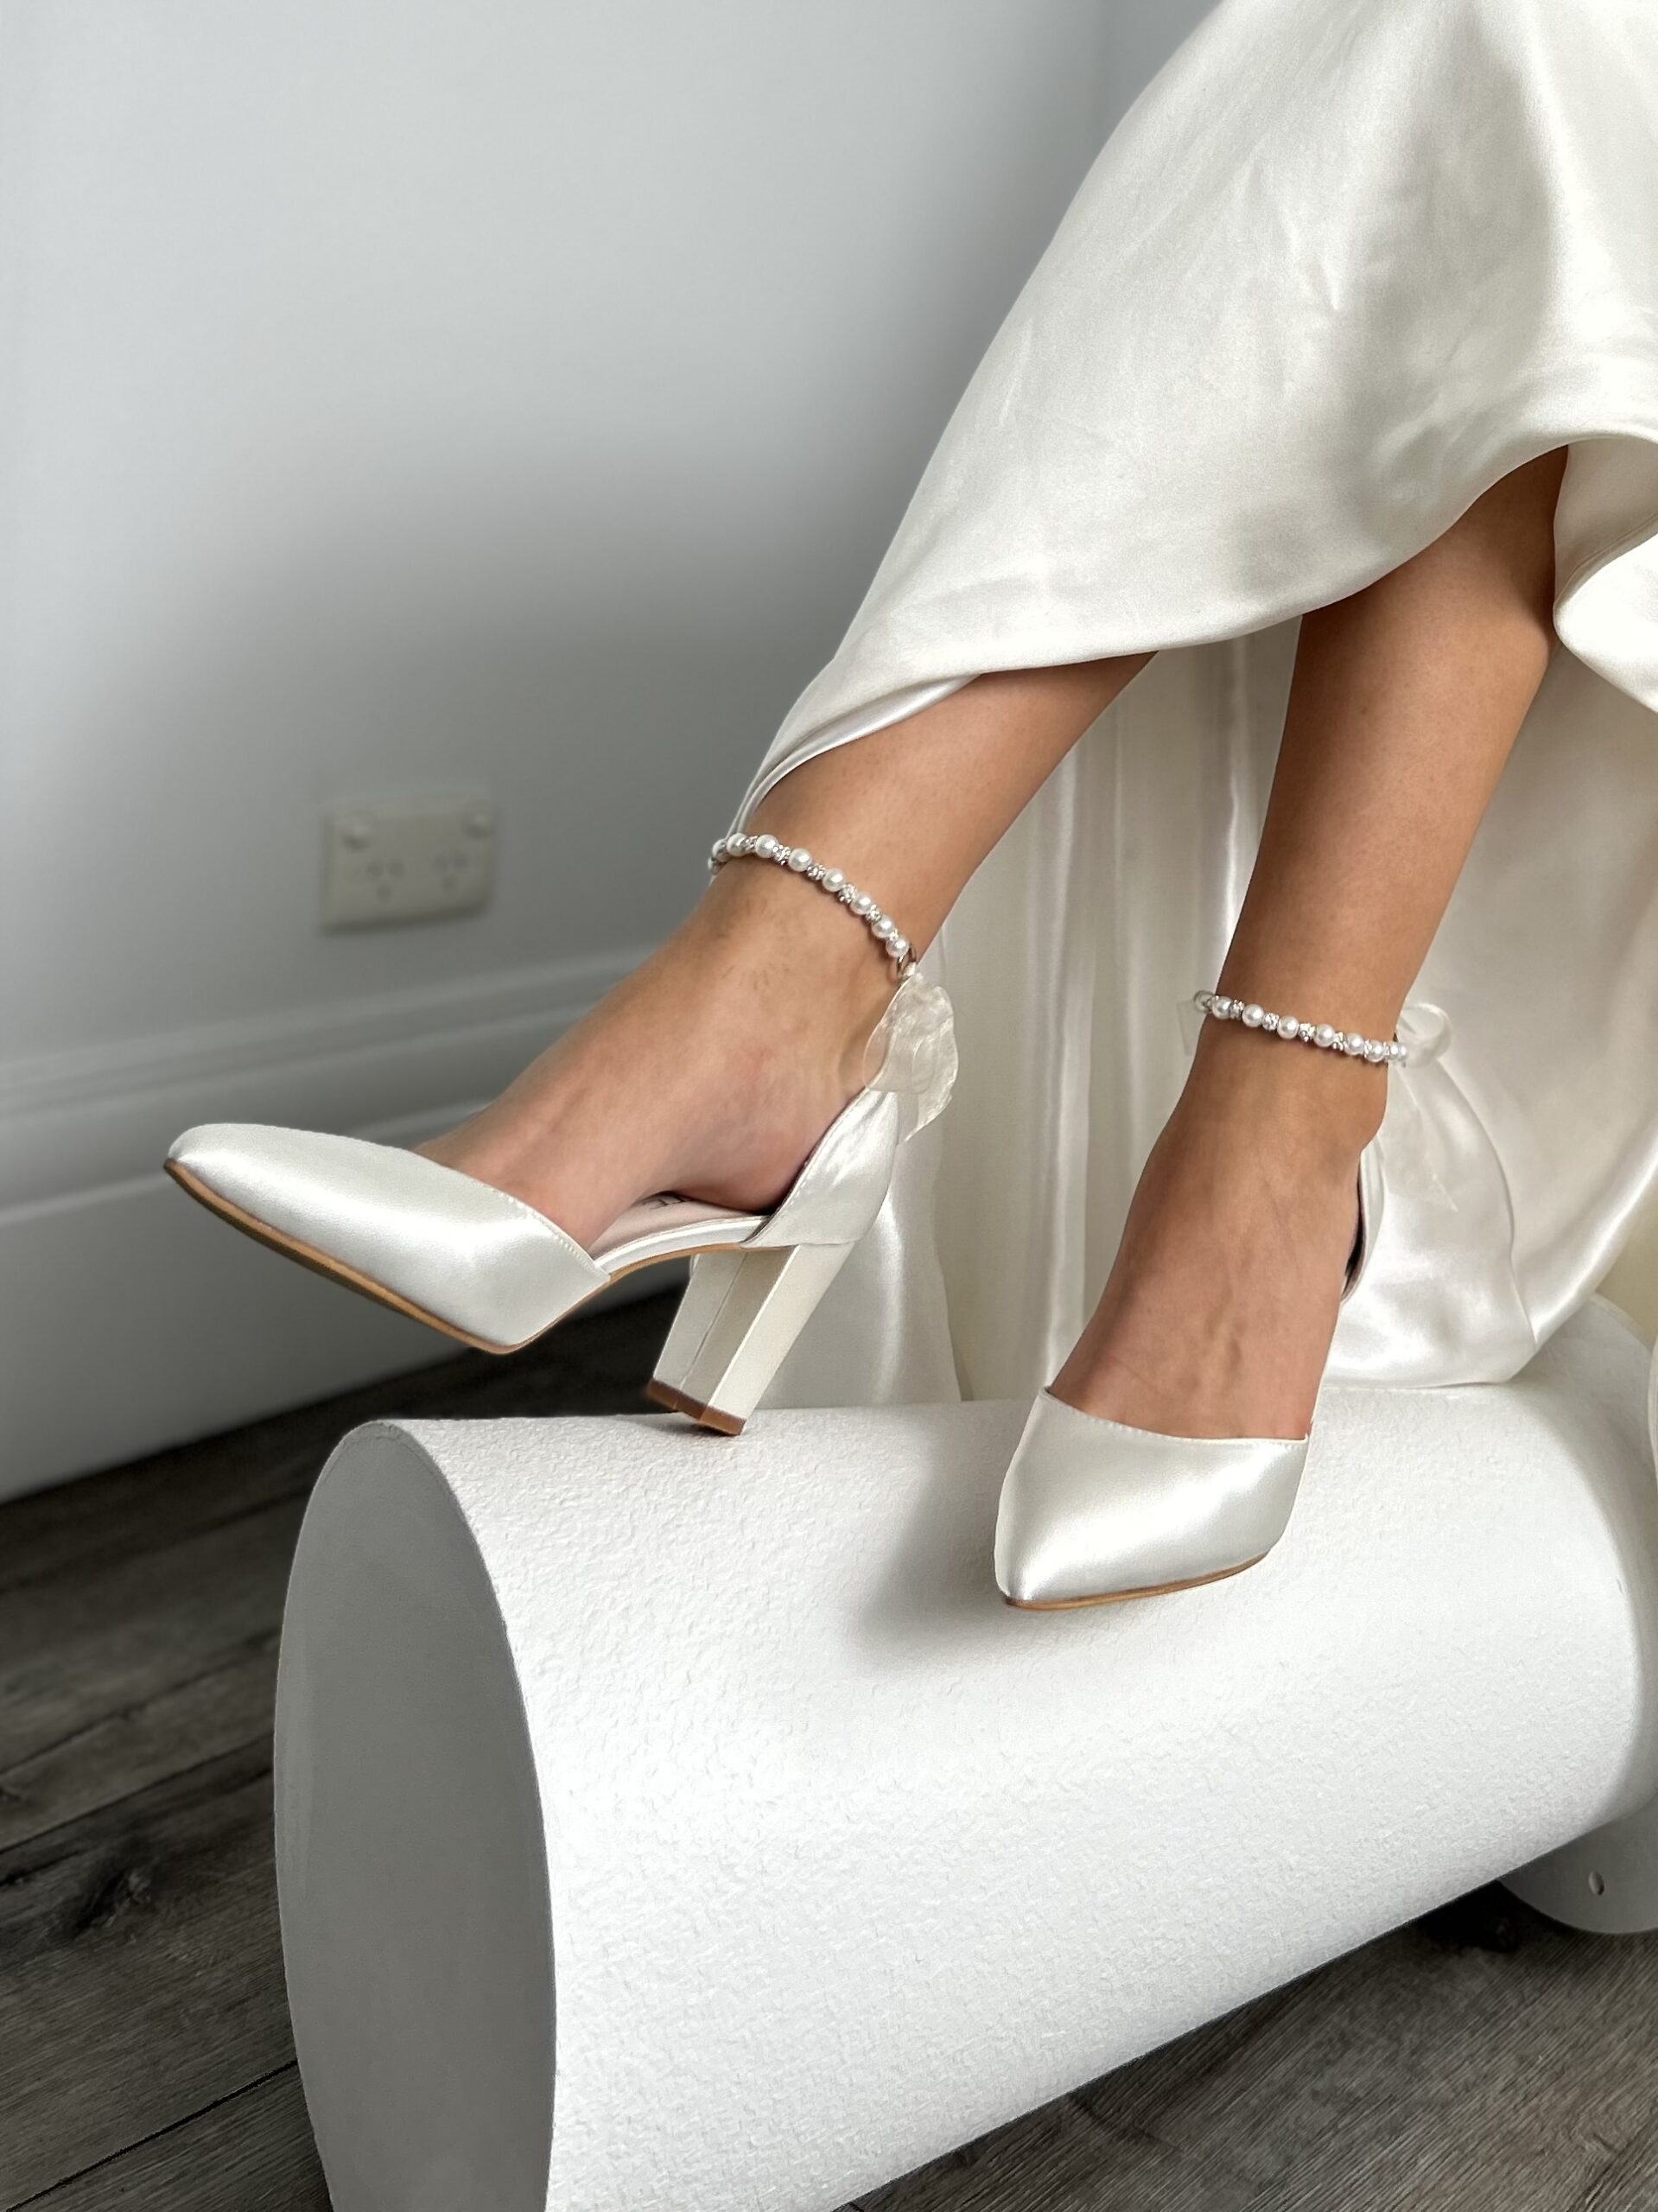 Florence Ivory Suede Block Heel Bridal Shoes With Satin Bow | Emmy London |  Ivory bridal shoes, Wedding shoes heels, Bridal shoes